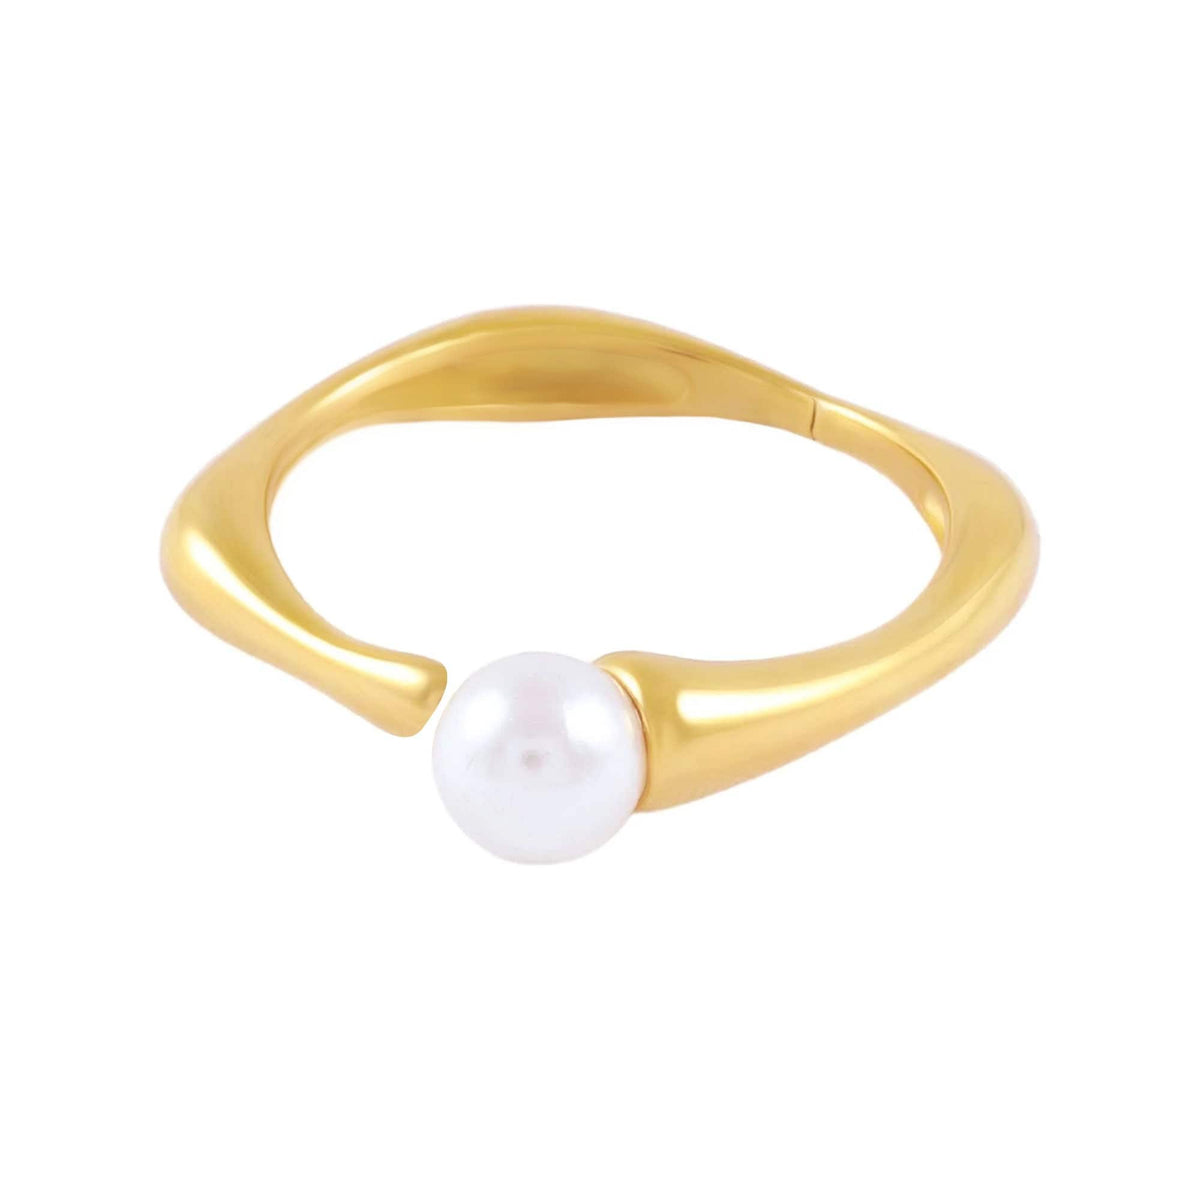 BohoMoon Stainless Steel Cleo Pearl Ring Gold / US 6 / UK L / EUR 51 (small)